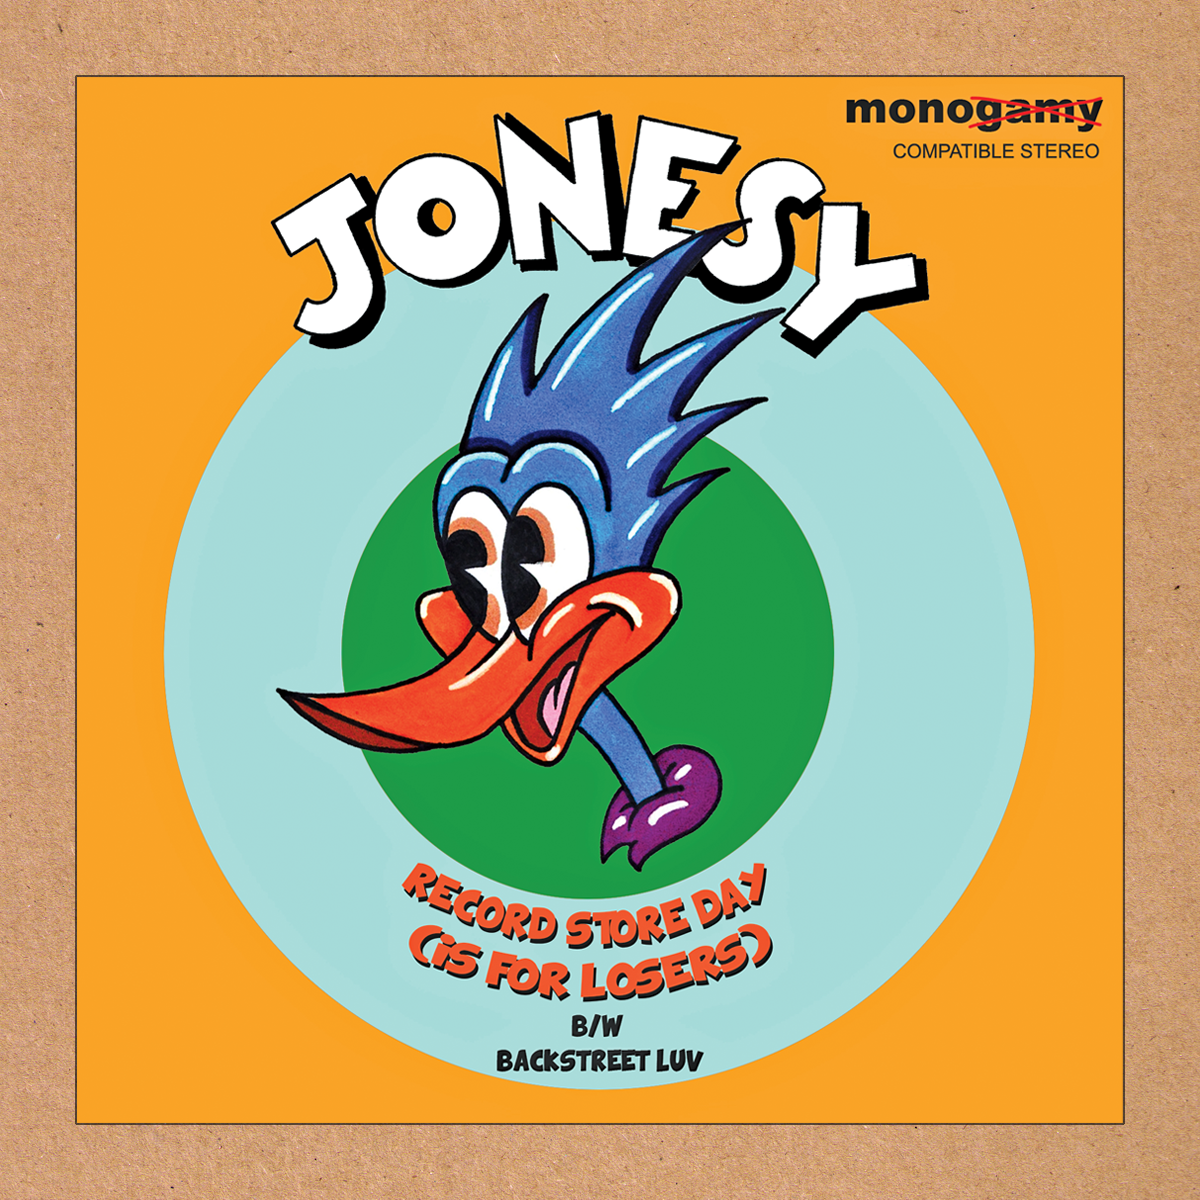 Jonesy-  Record Store Day (Is For Losers) 7" ~RARE LTD TO 55 HAND NUMBERED COPIES!